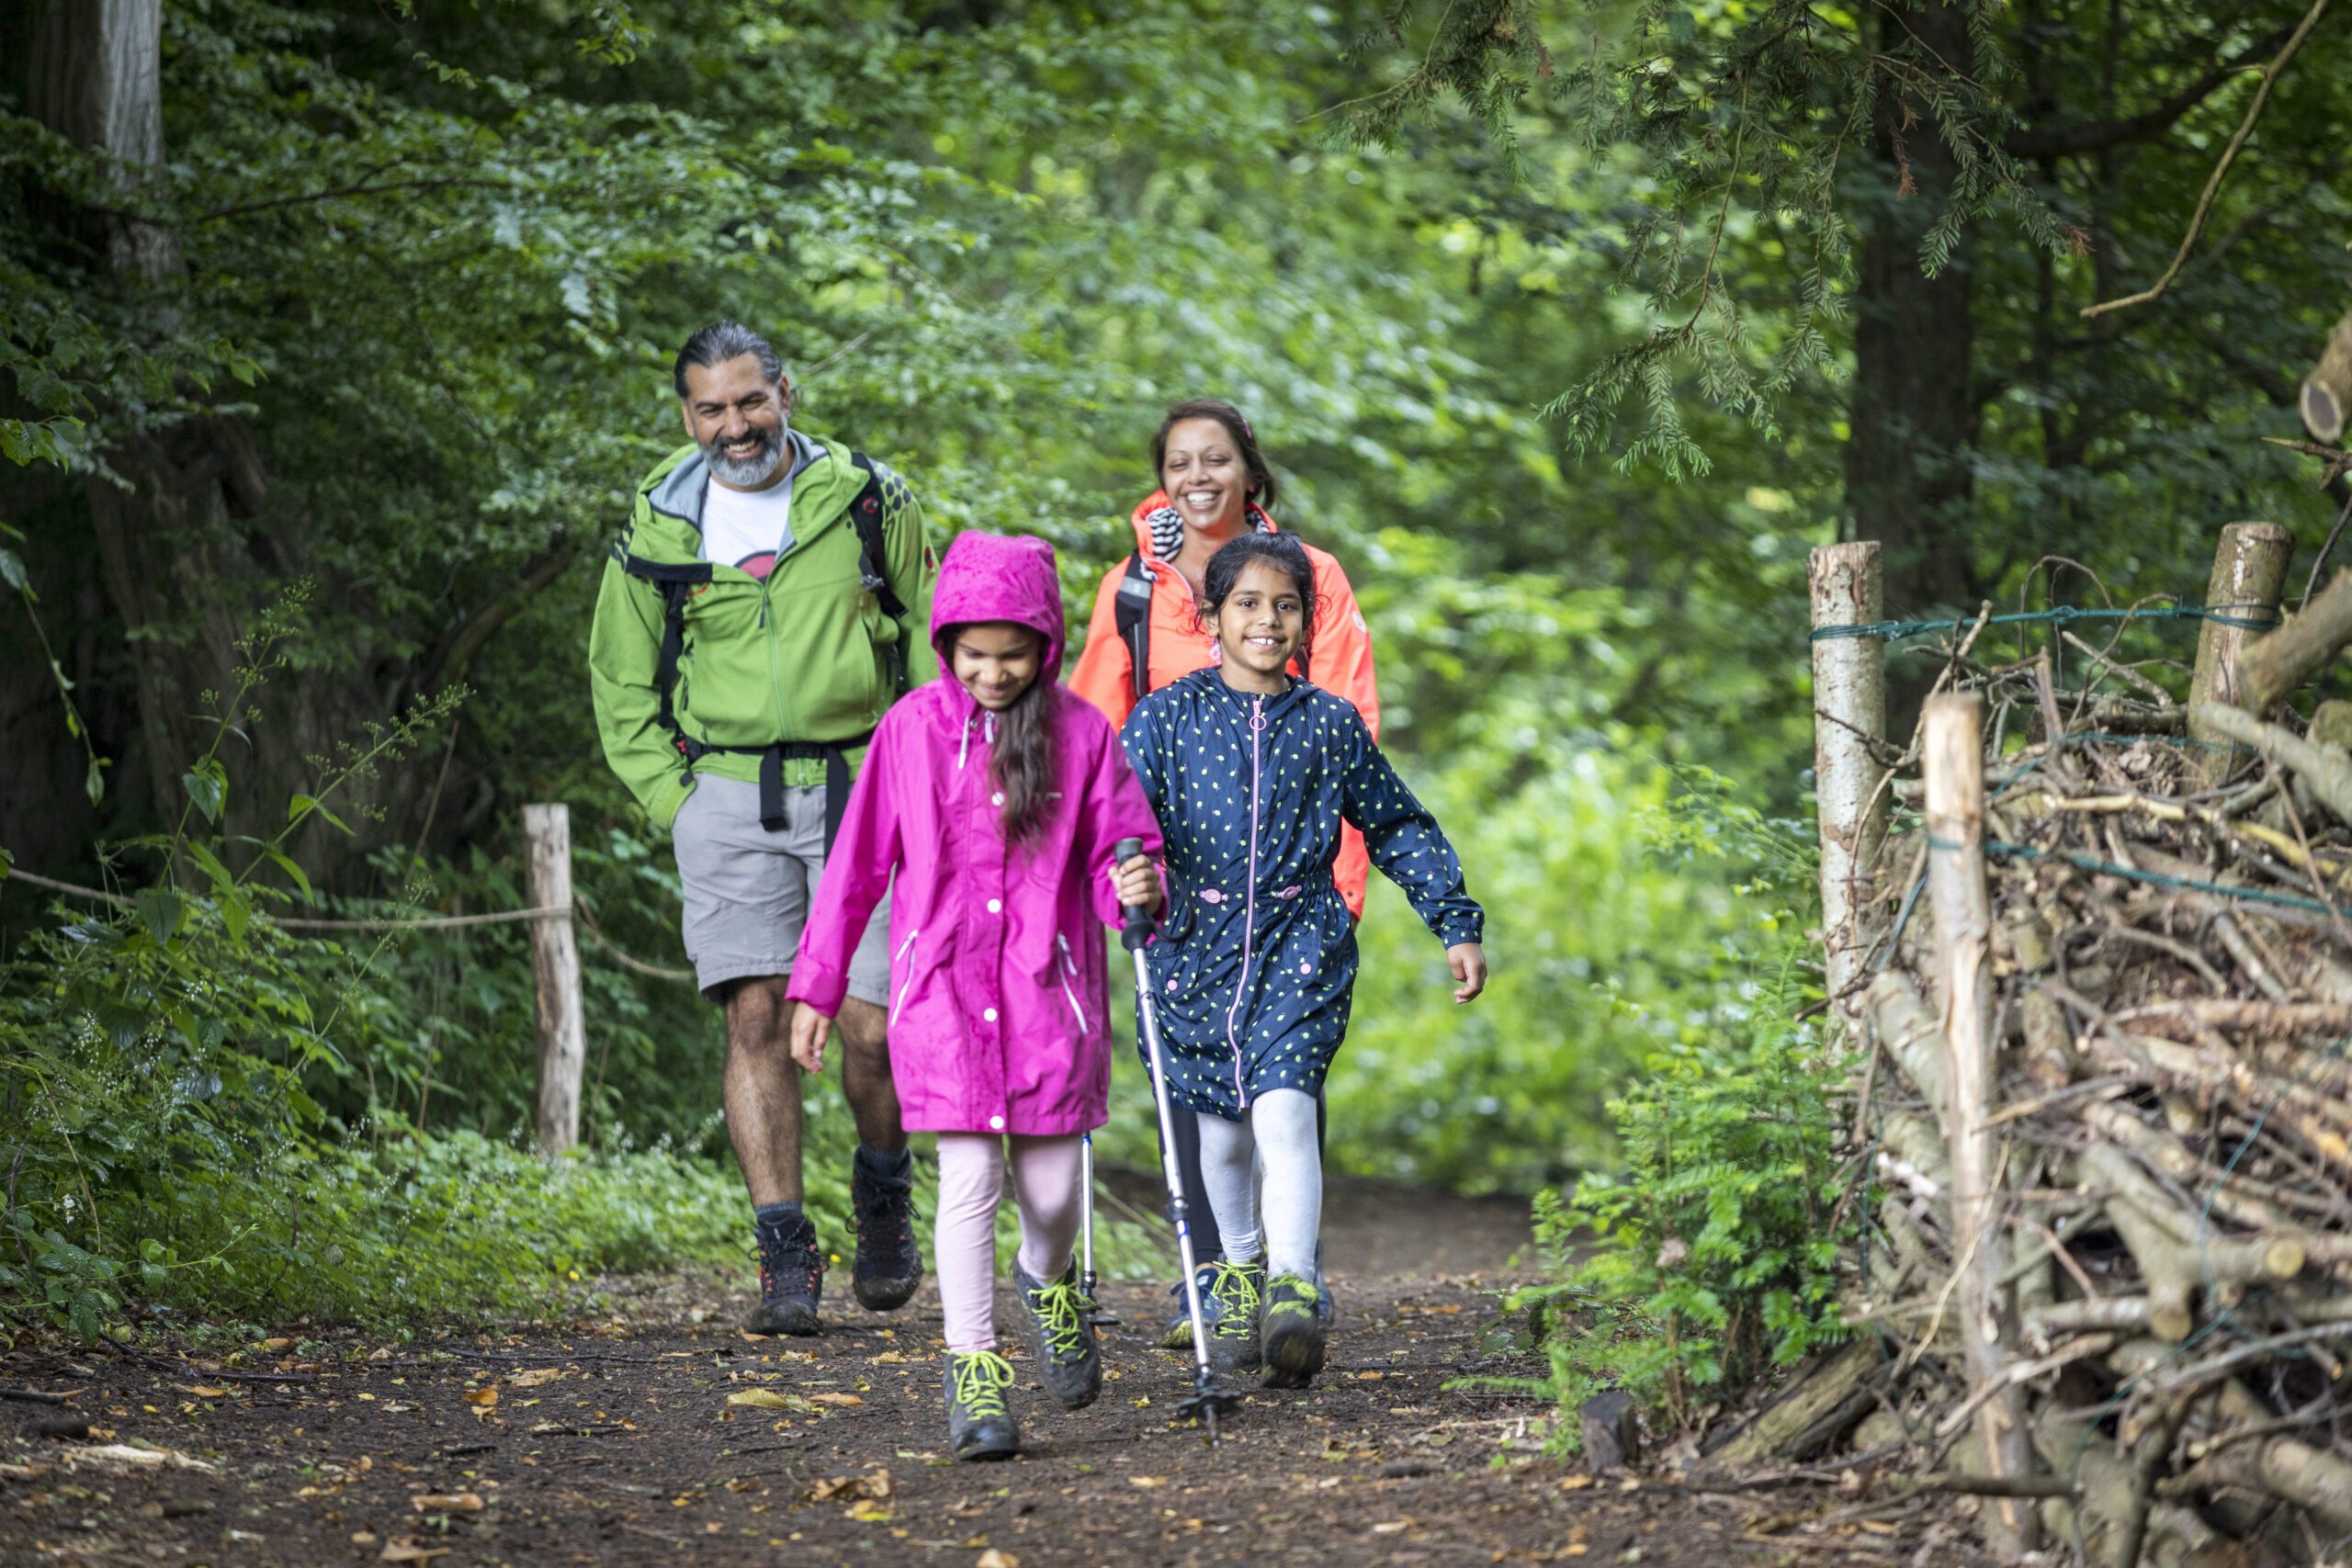 Two adults and two children walking towards camera, on a woodland path. Sunny day, everyone is smiling.